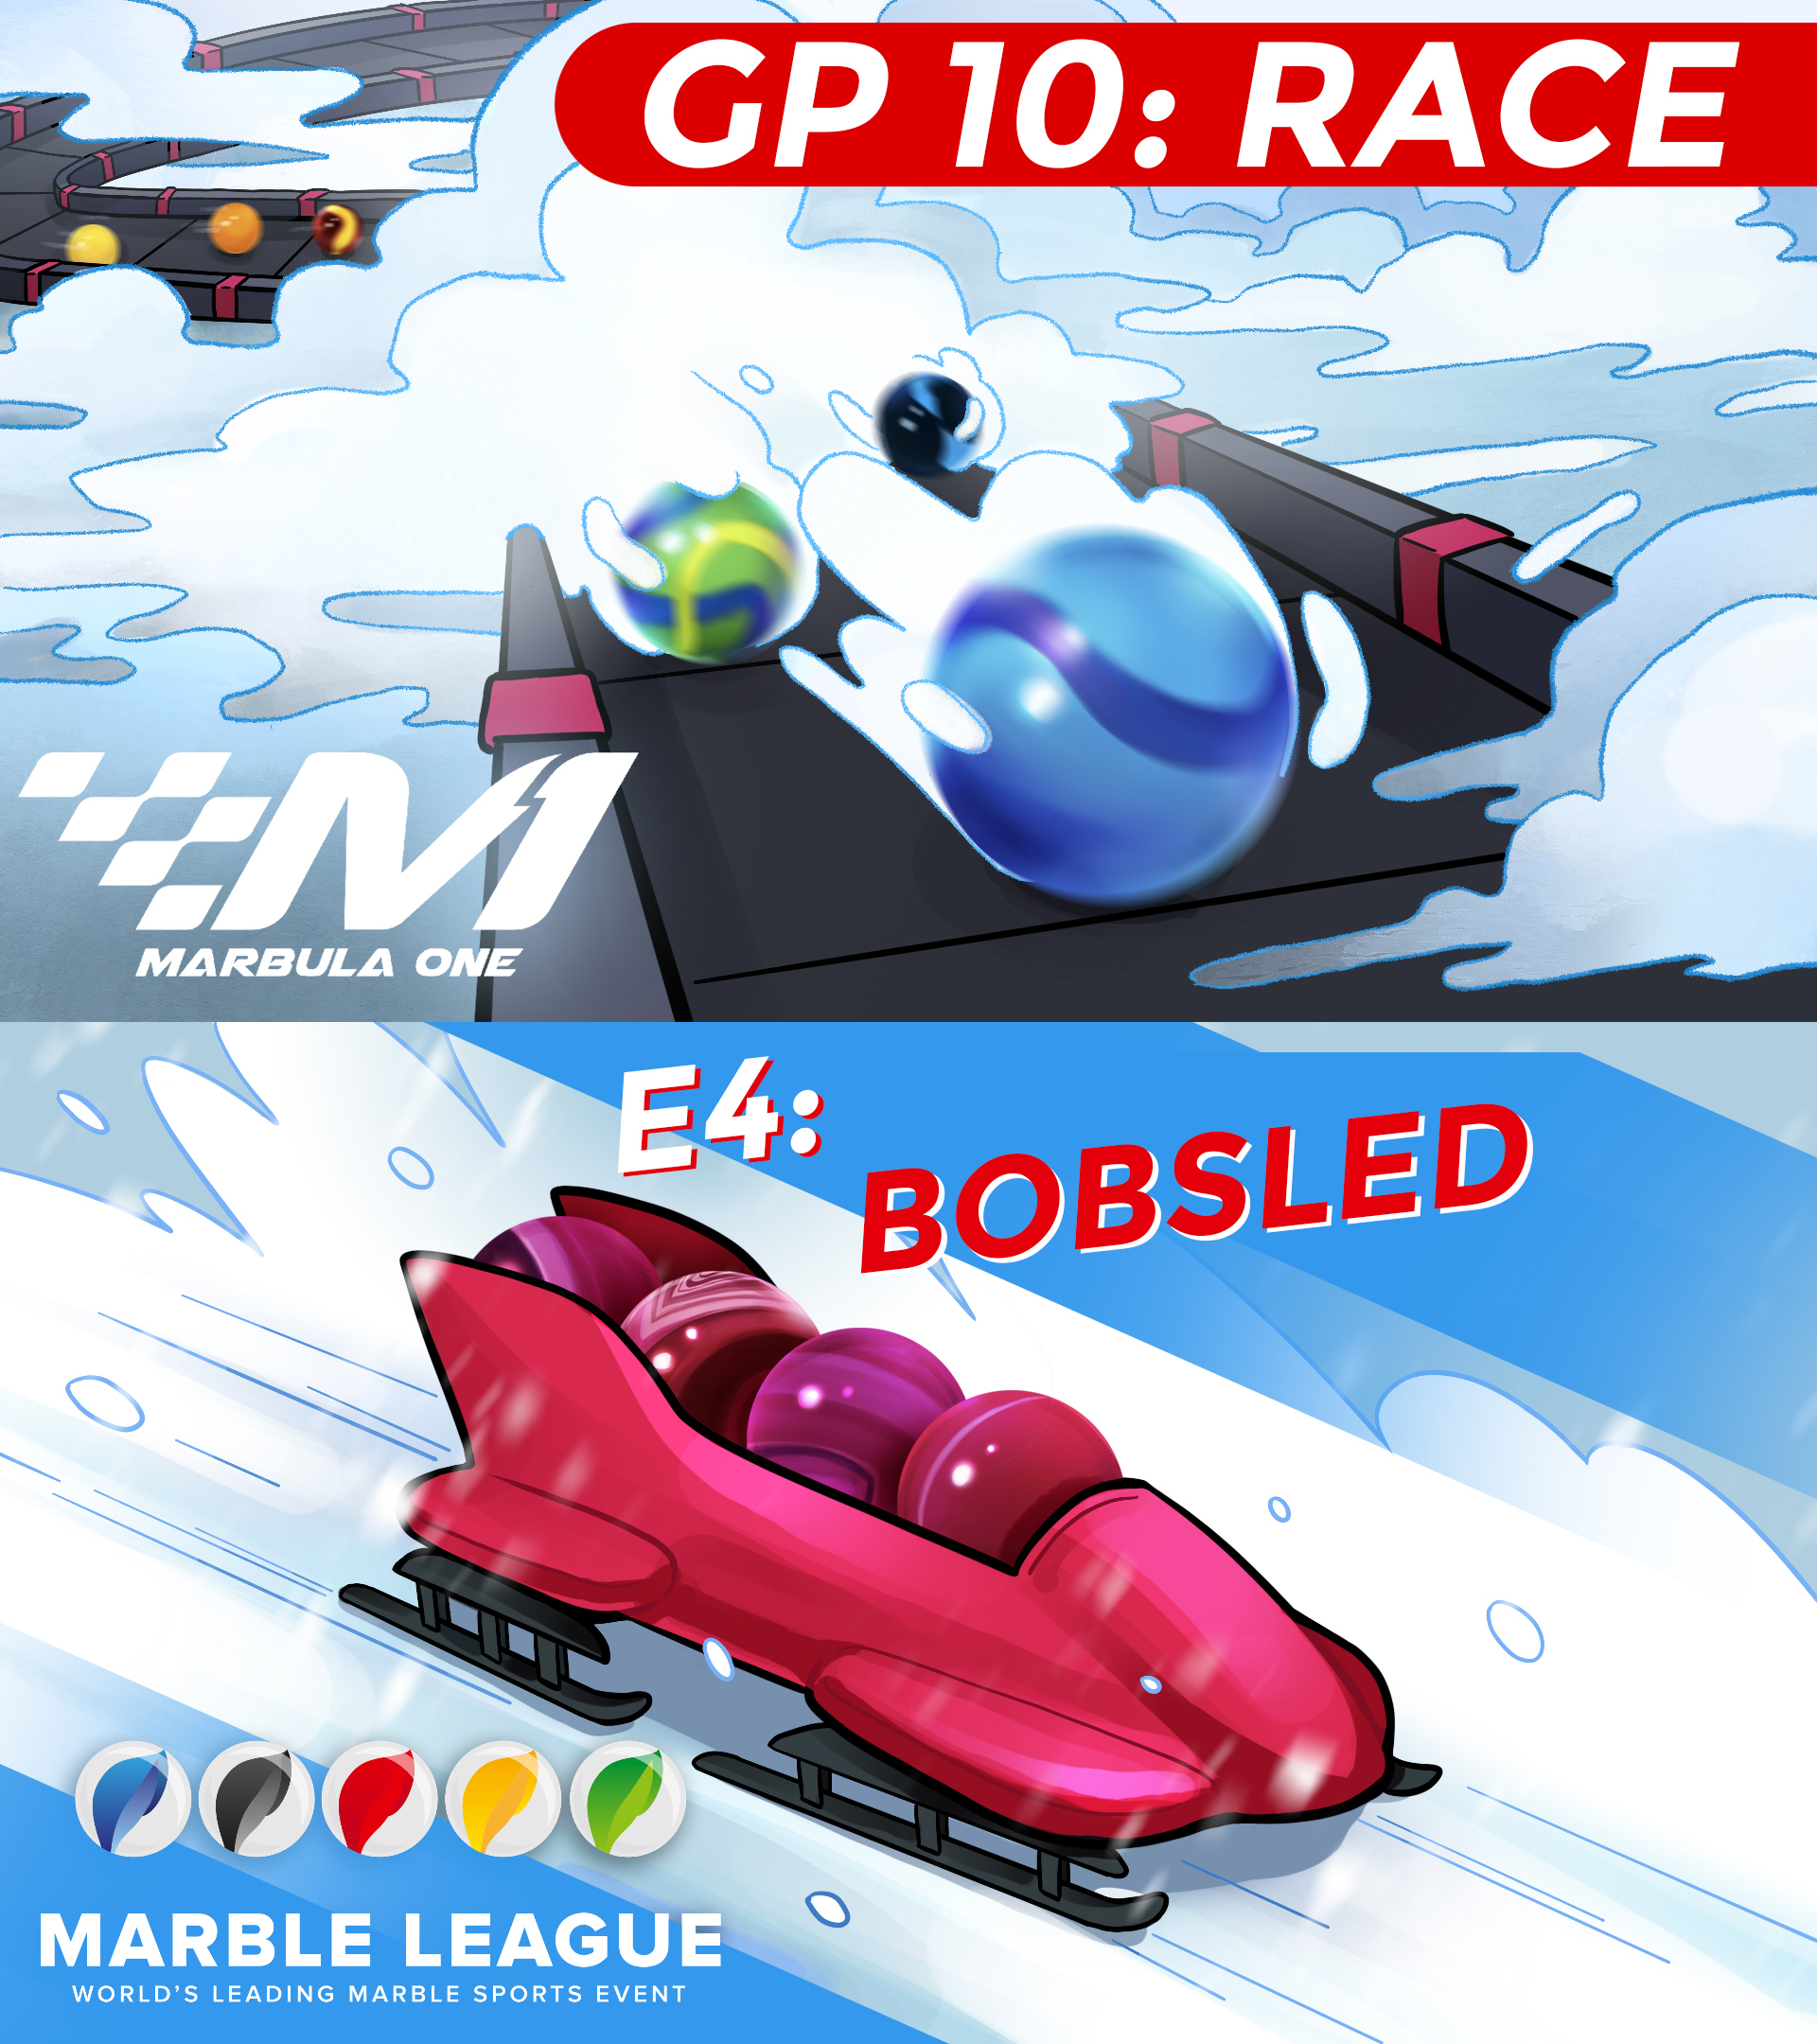 Thumbnails for Marbula One GP 10: Race, and WML Bobsled.